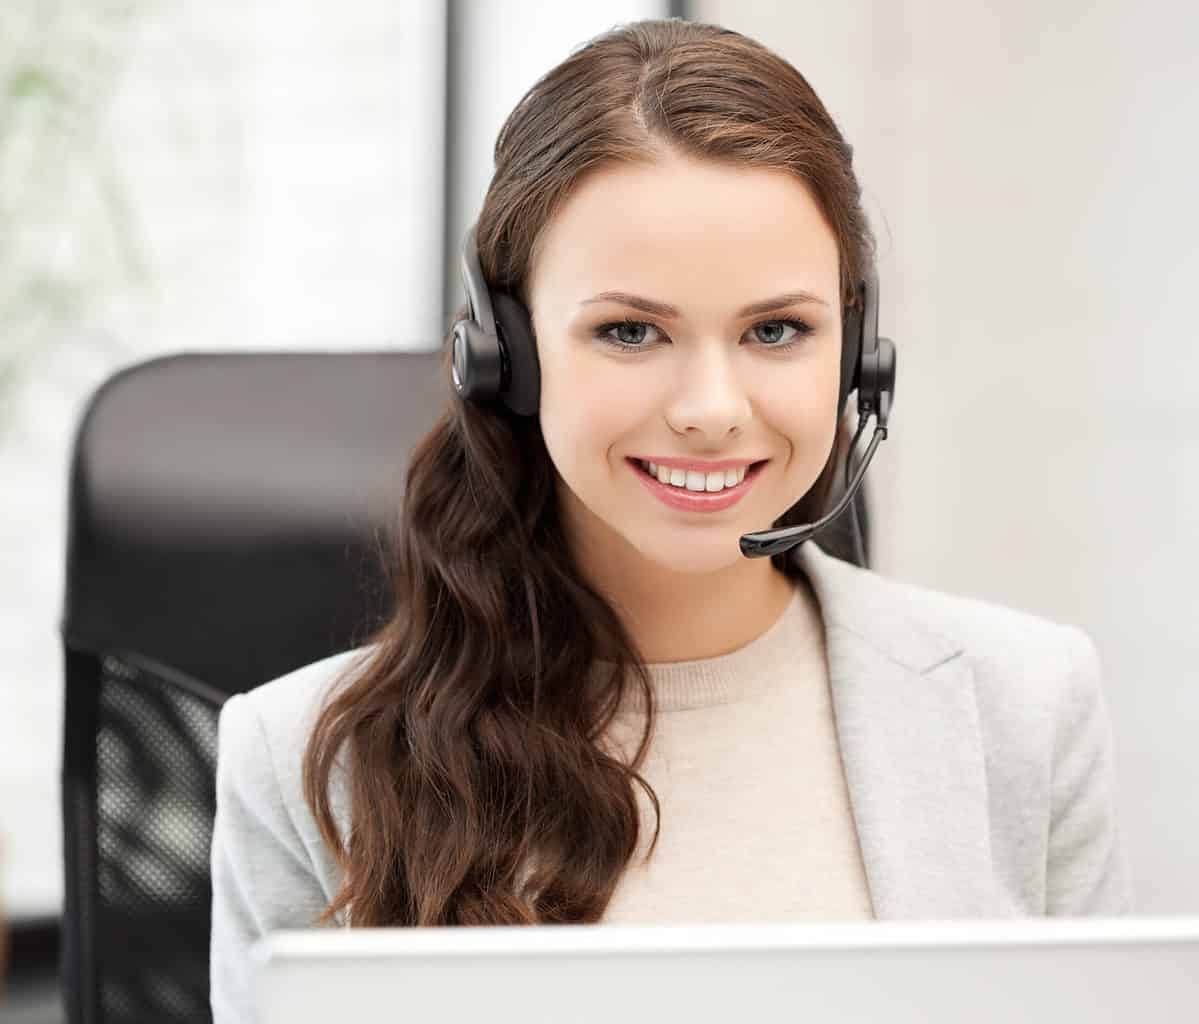 Blue Sky Limo Customer Support Agent